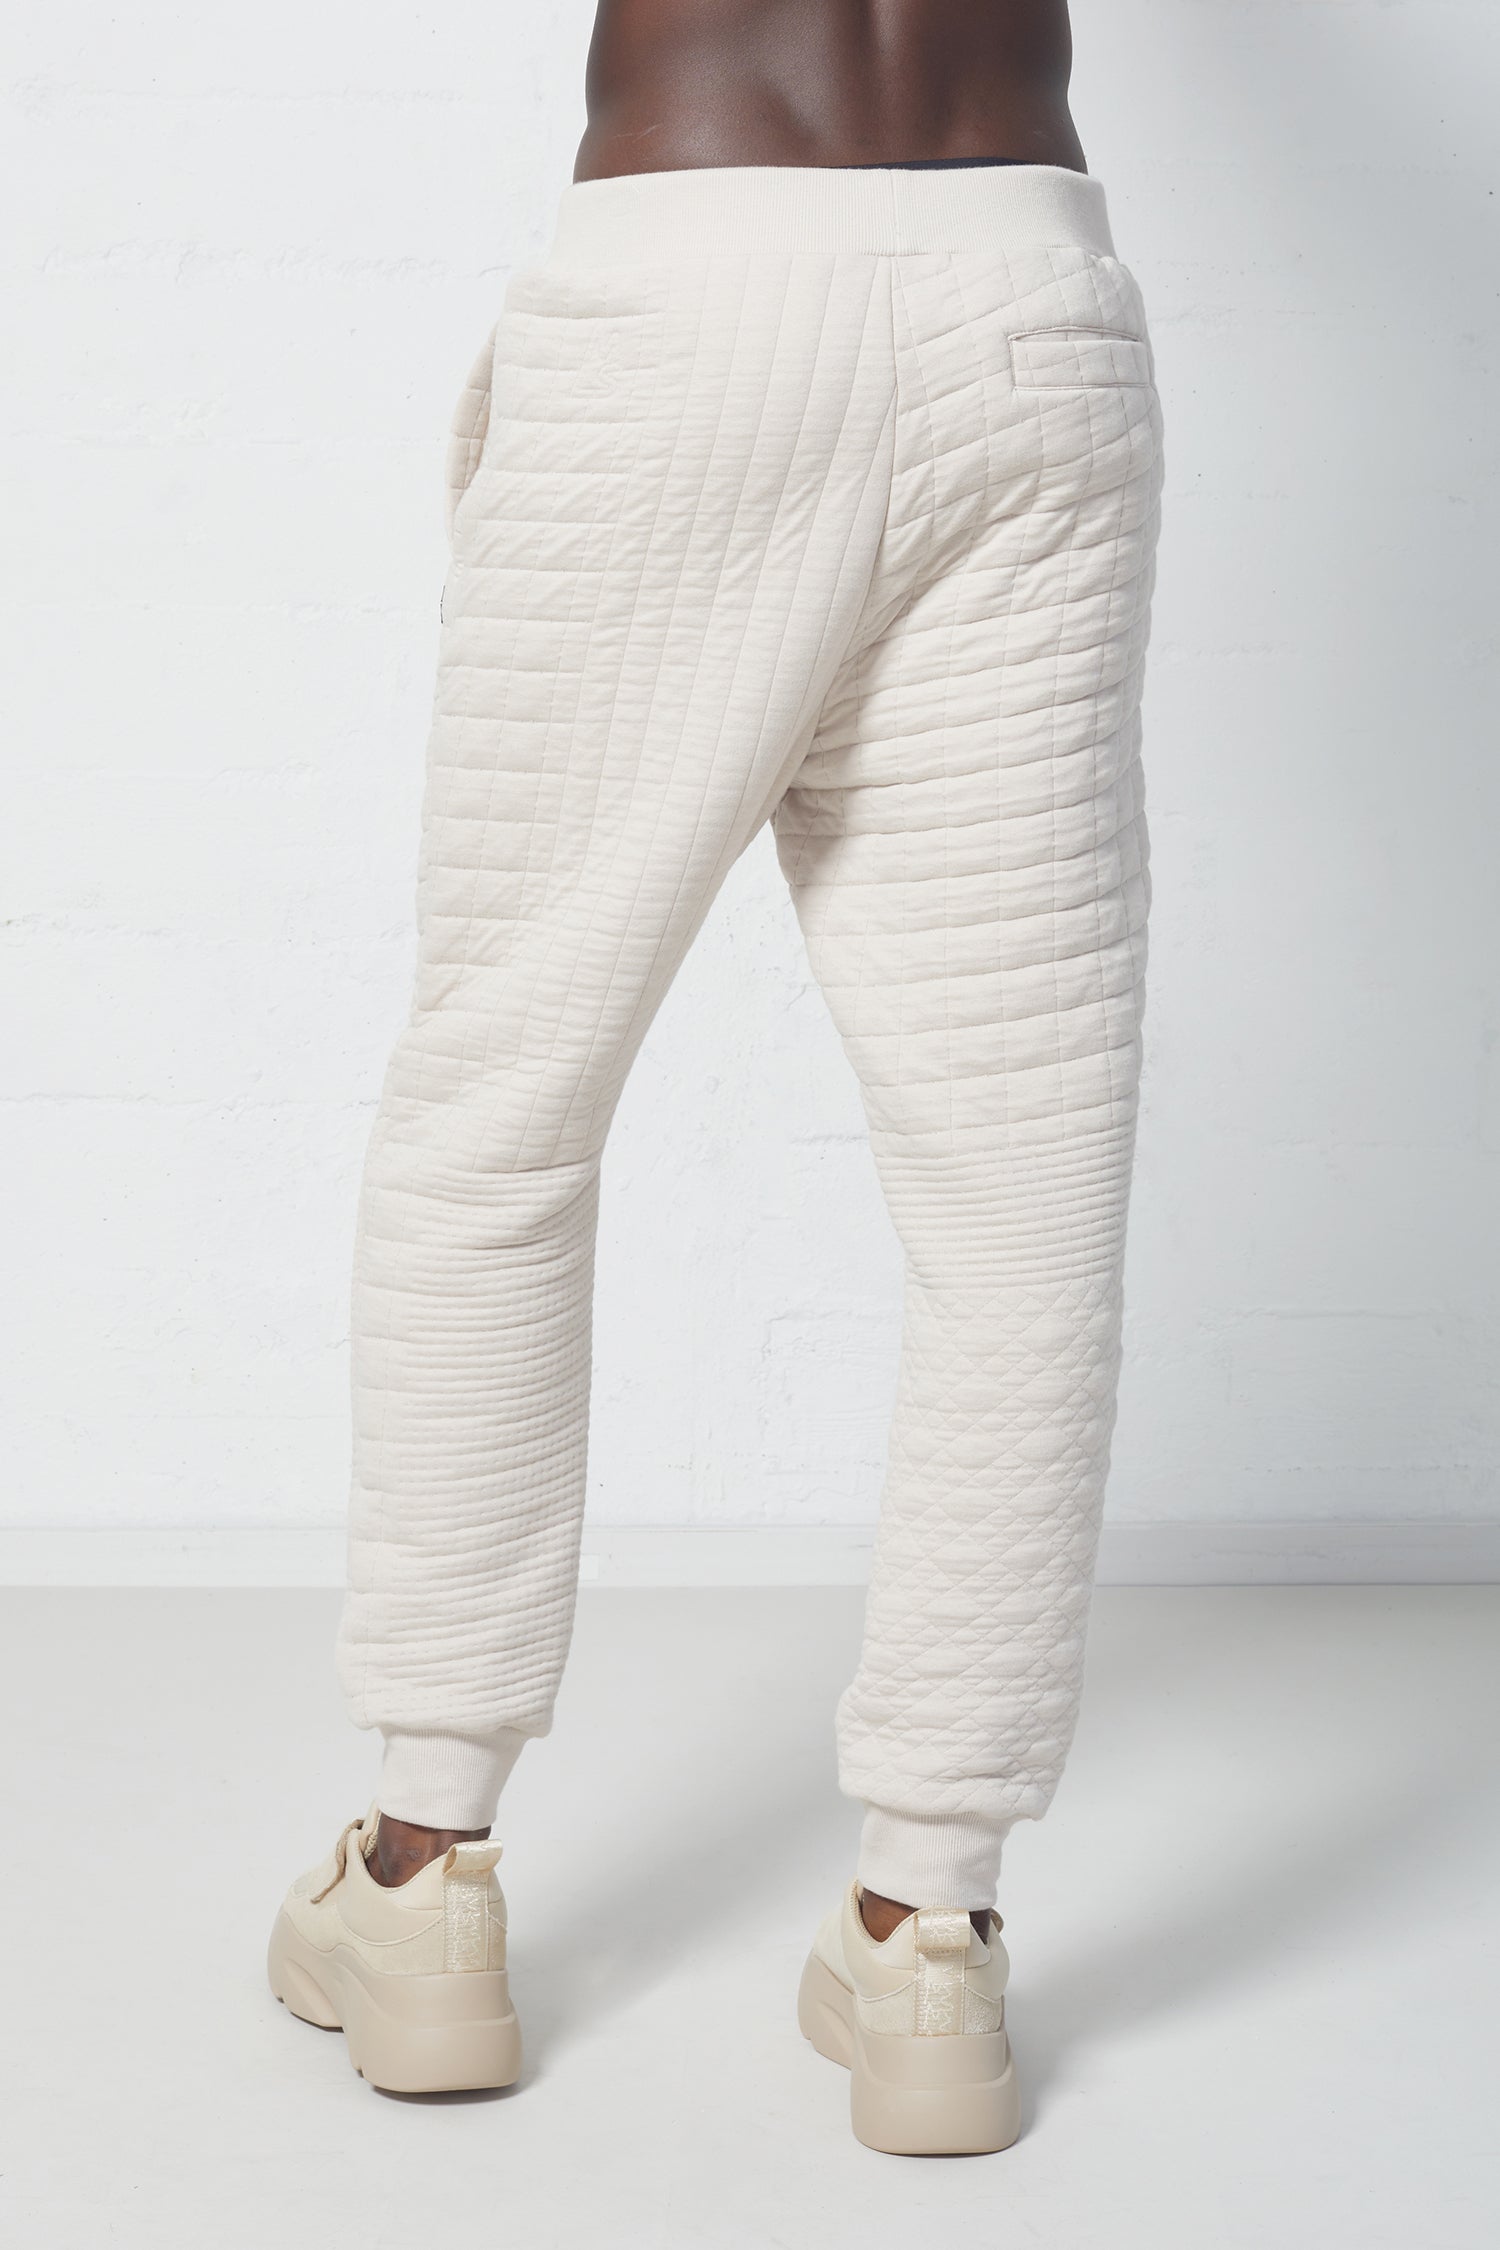 Lovette Quilted Jacquard Sweatpants